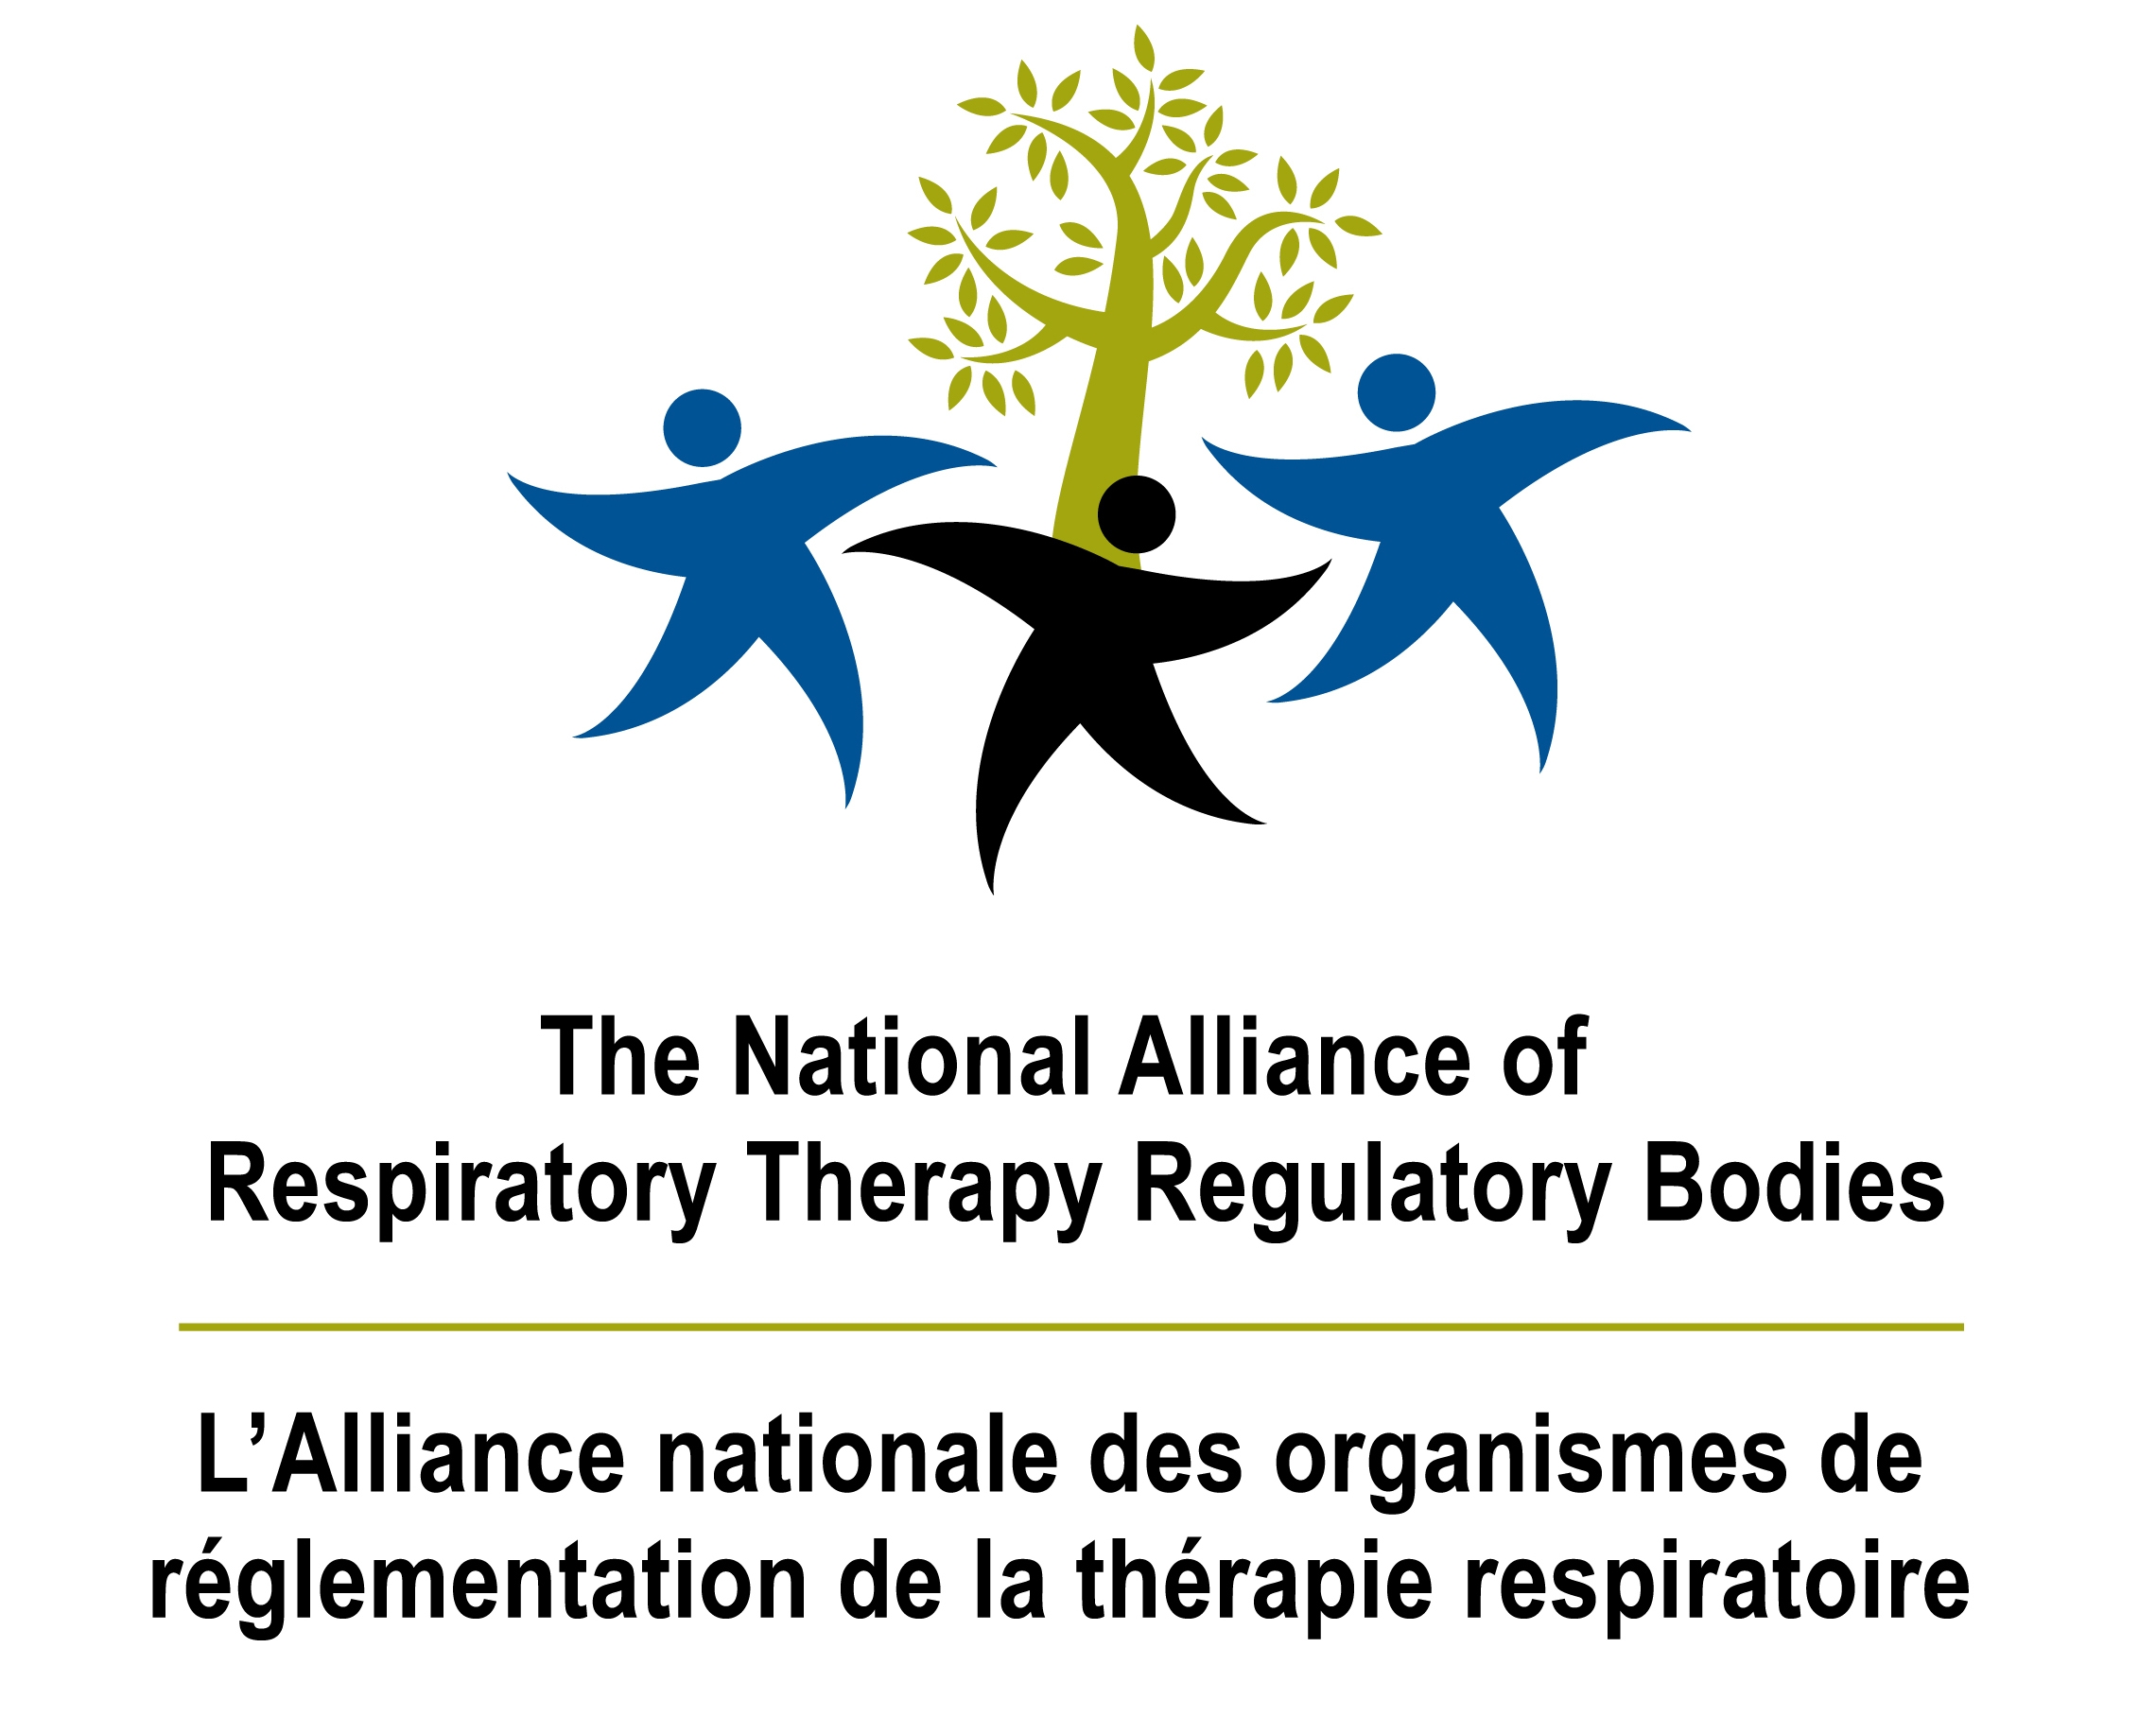 The National Alliance of Respiratory Therapy Regulatory Bodies